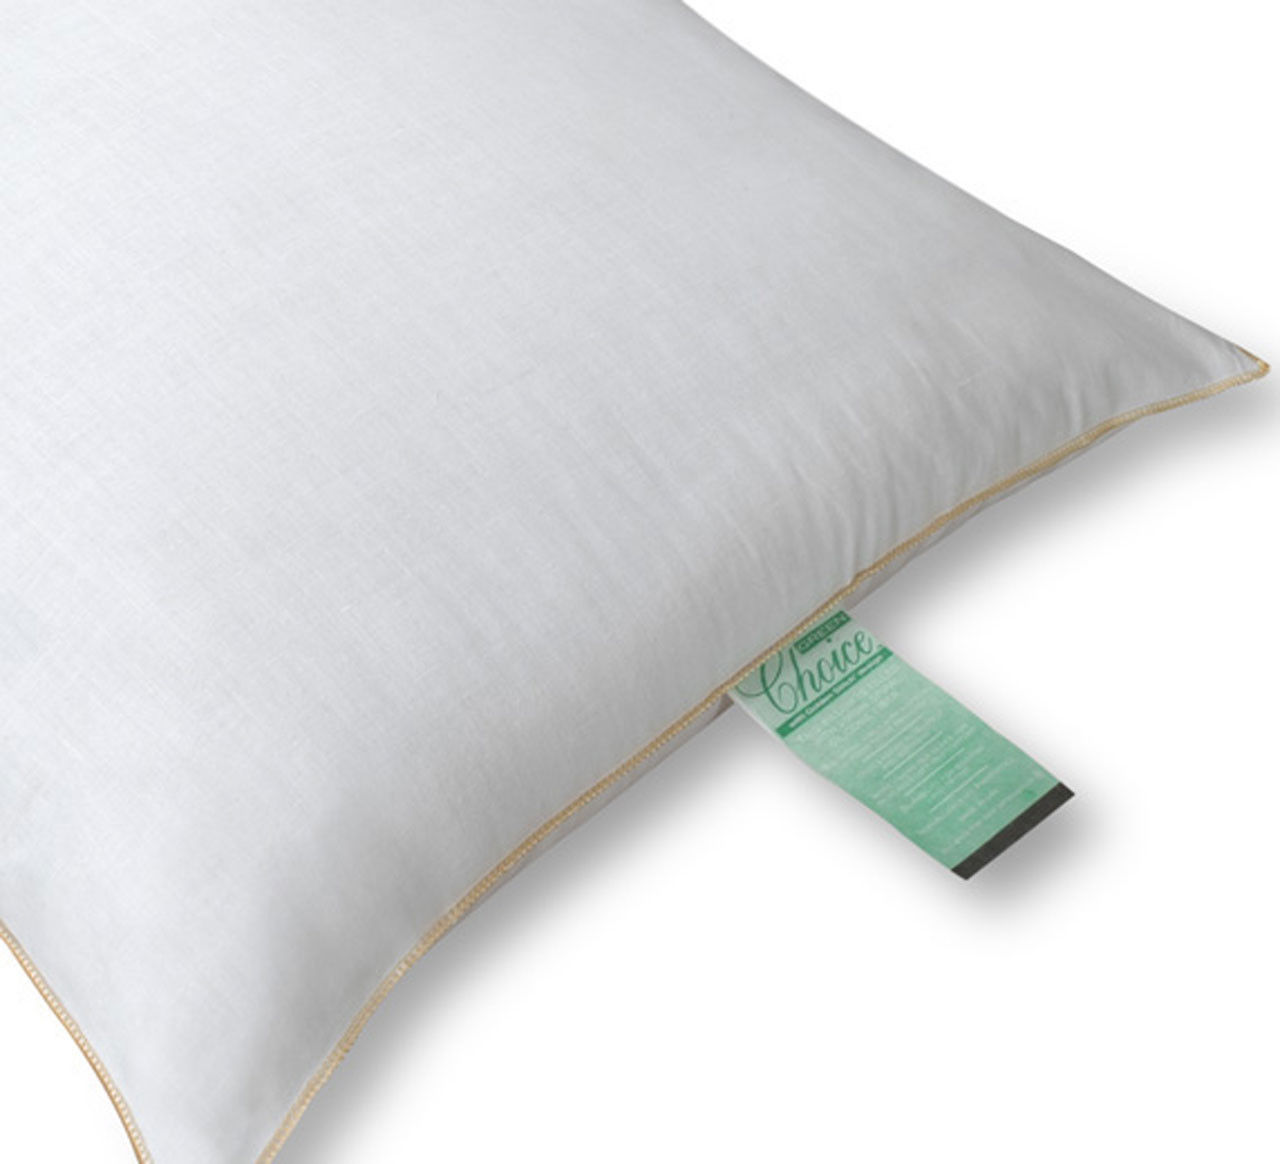 Can you specify the manufacturing location of green choice pillows?